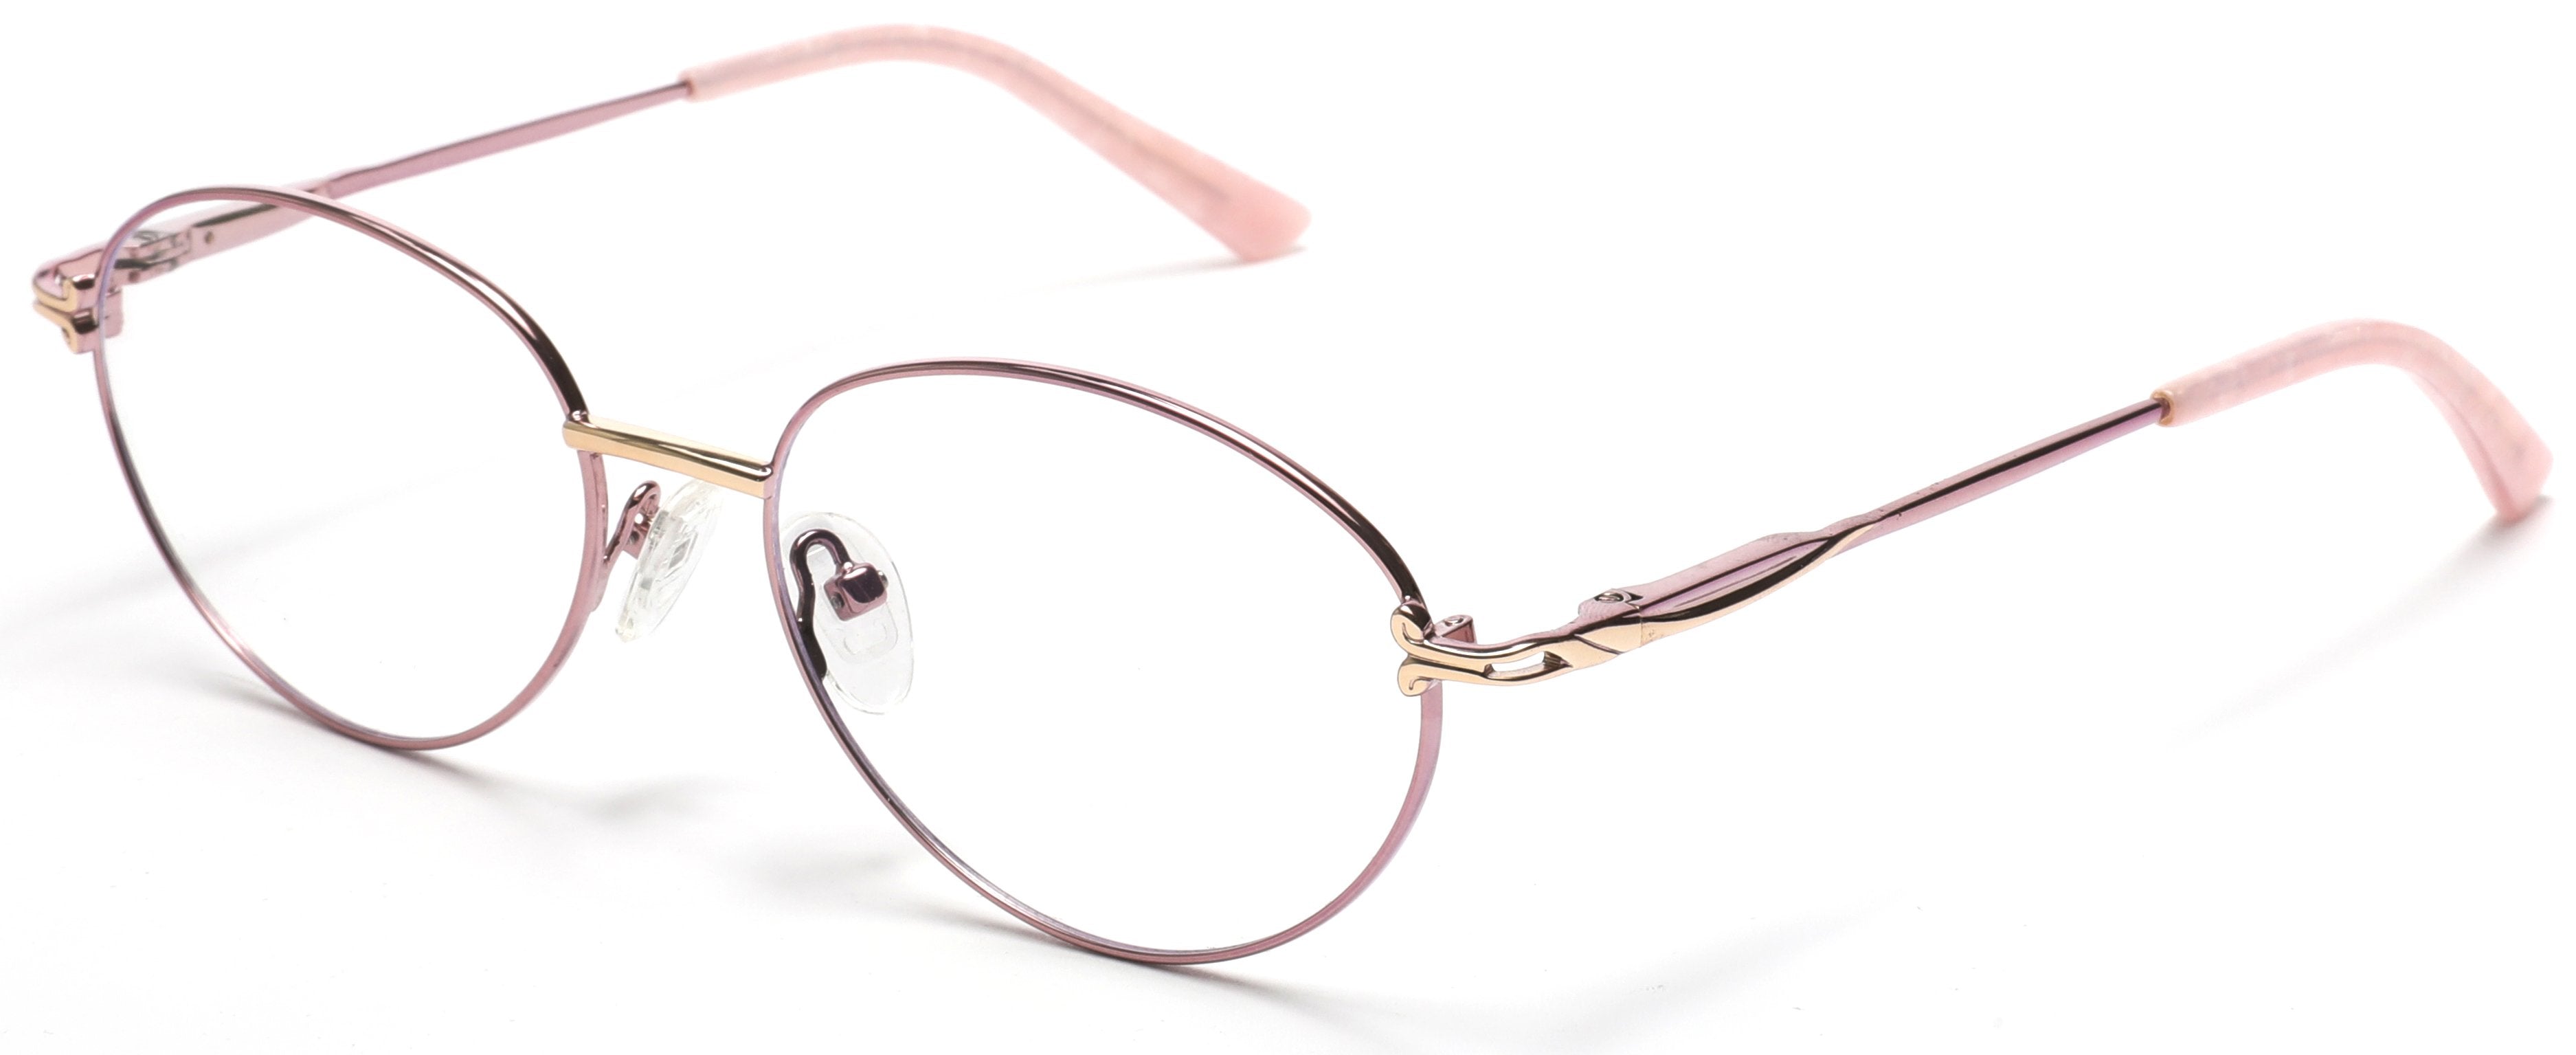 Tango Optics Round Metal Eyeglasses Frame Luxe Reading Stainless Steel Gold Accent Caresse Crosby Pink For Prescription Lens-Samba Shades